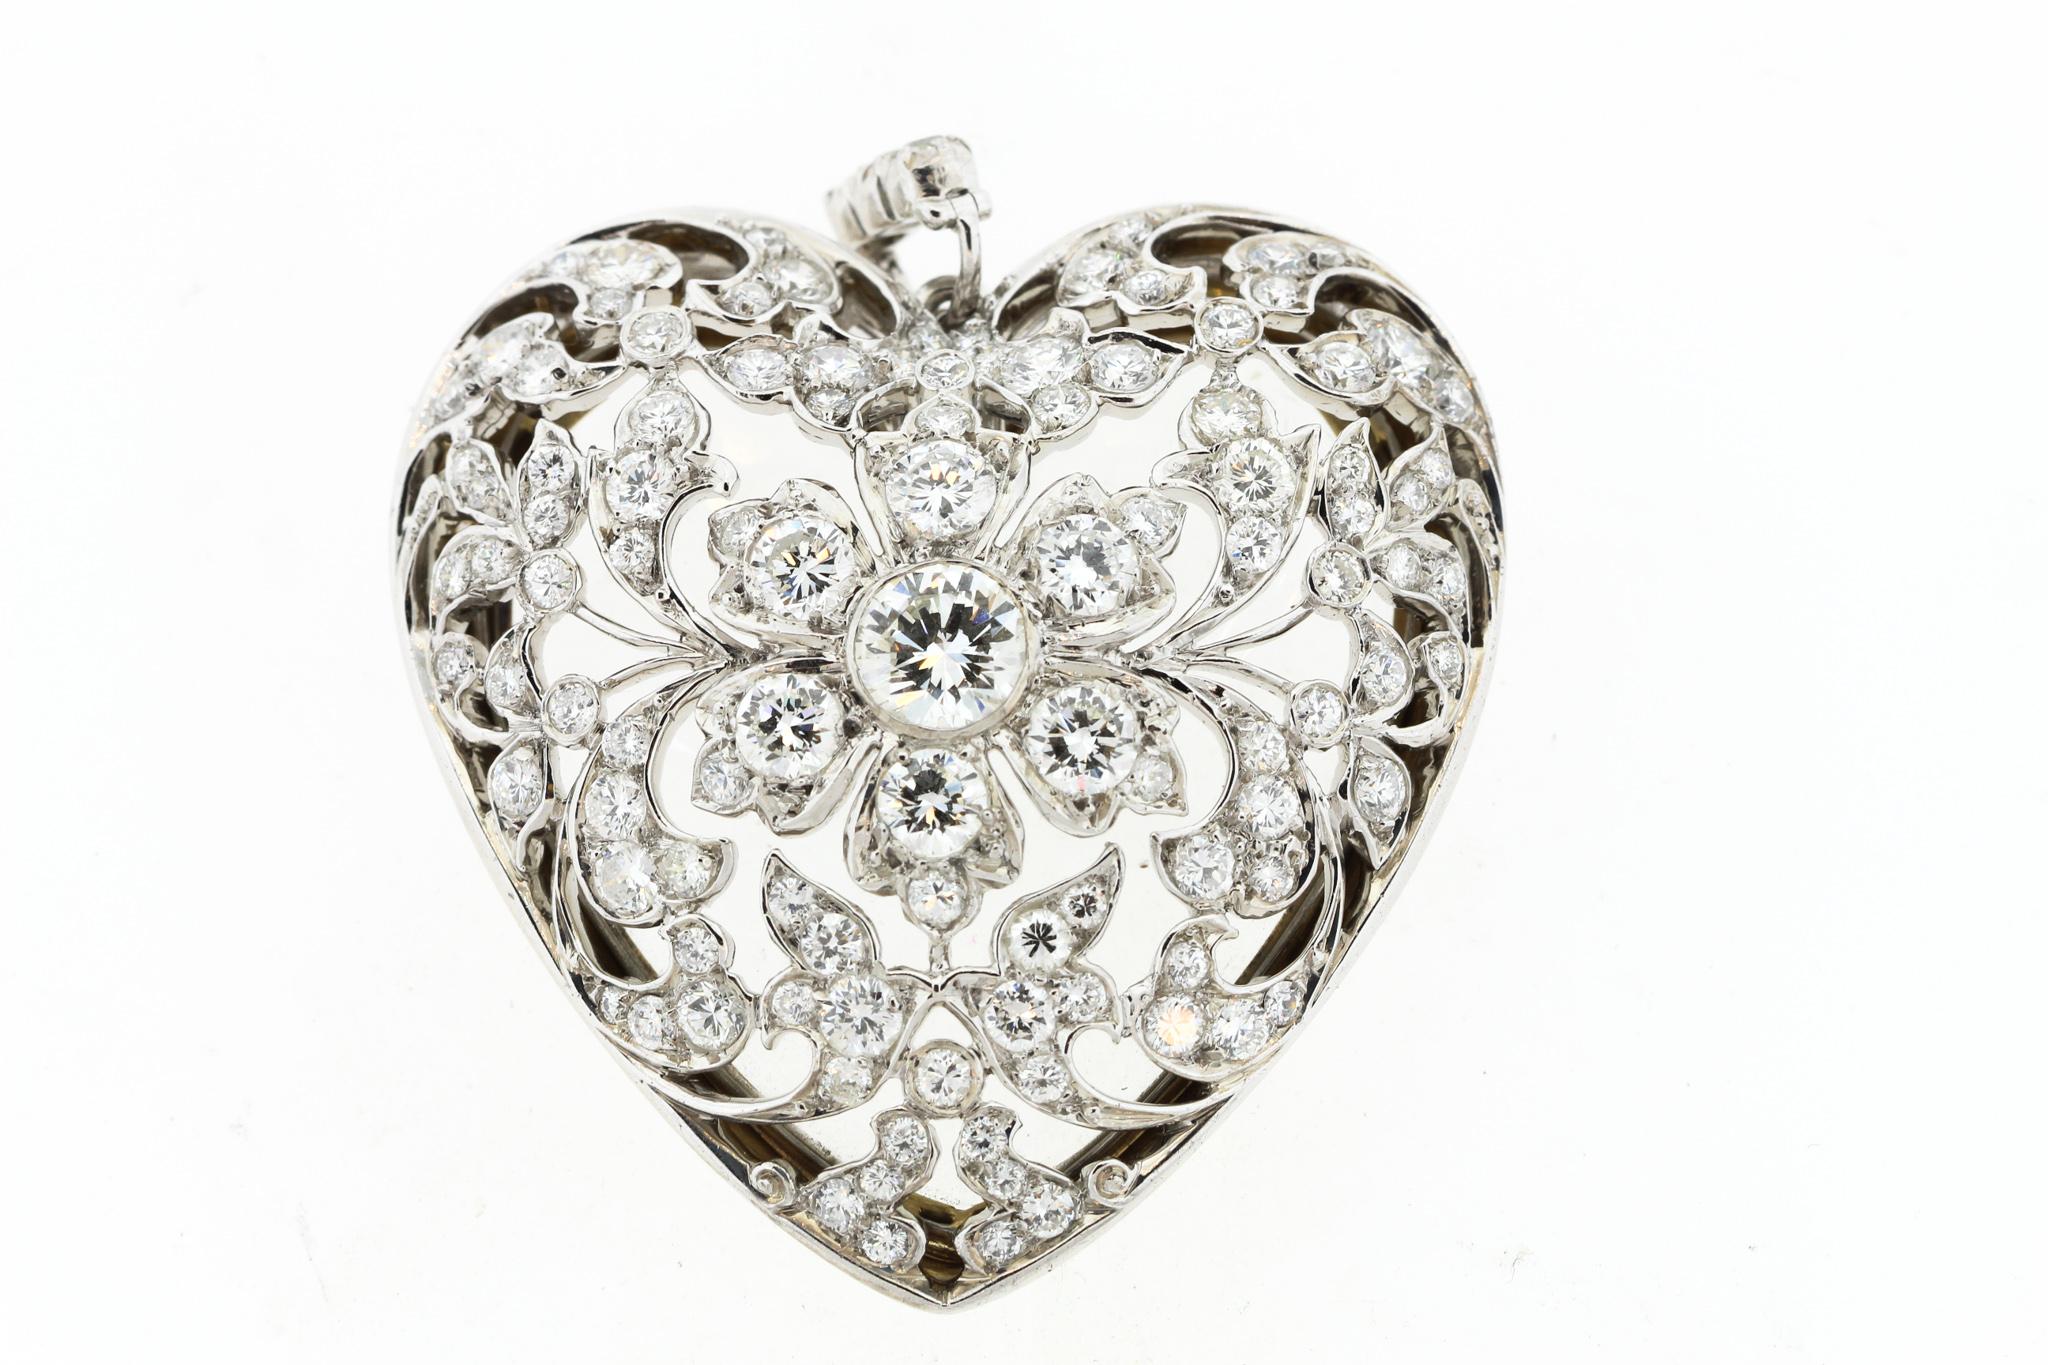 An exceptional platinum and gold diamond heart pendant with its original crystal back circa 1915. This large and romantic open work diamond heart is a true collectors item. The leaf and scroll design centers on a flower with single circular cut